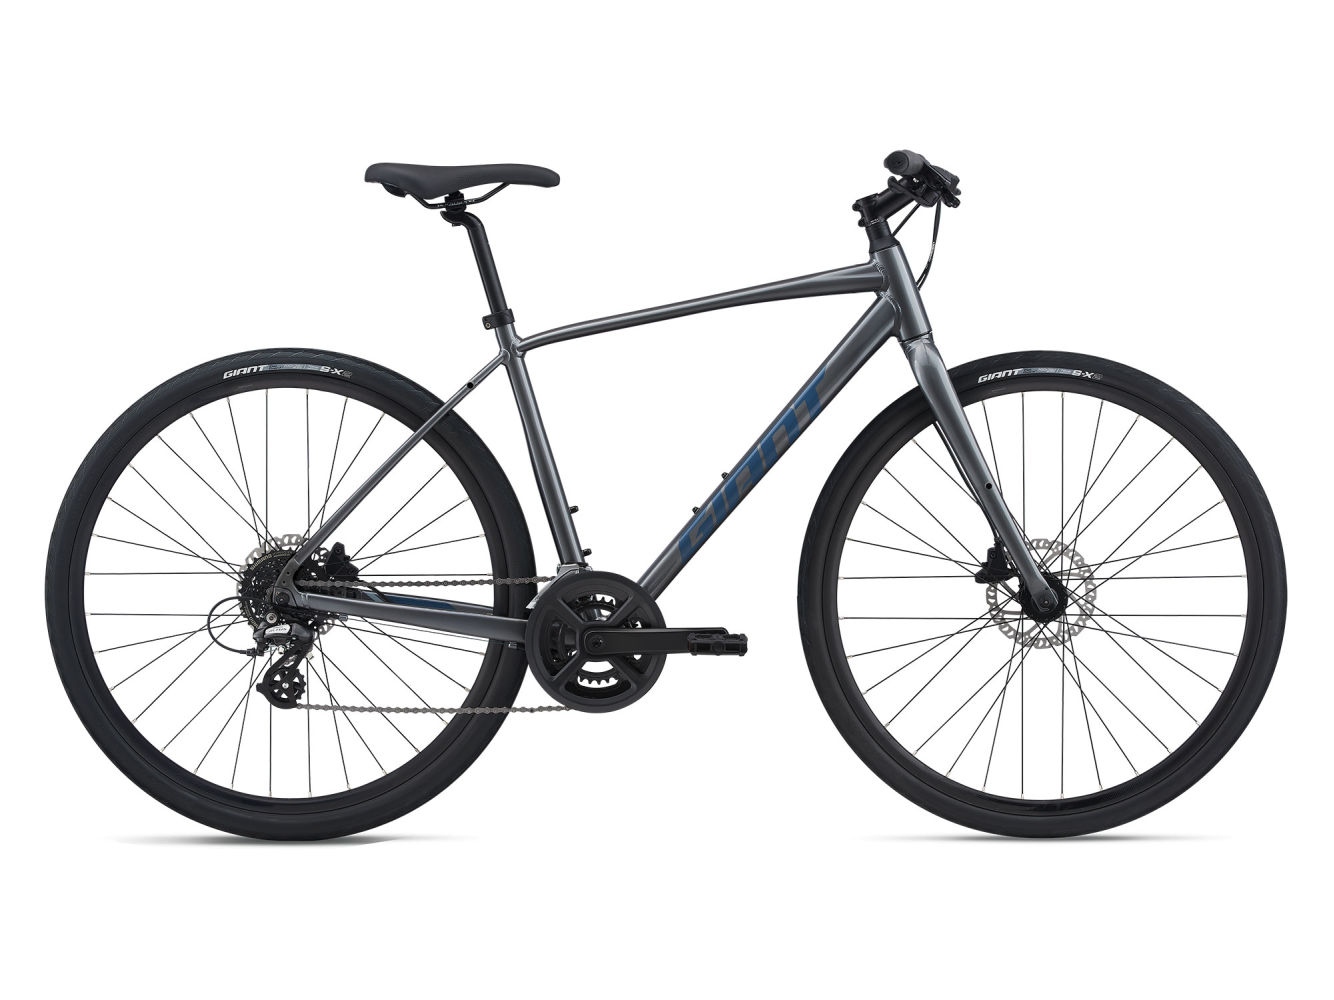 2 Disc (2021) | Giant Bicycles